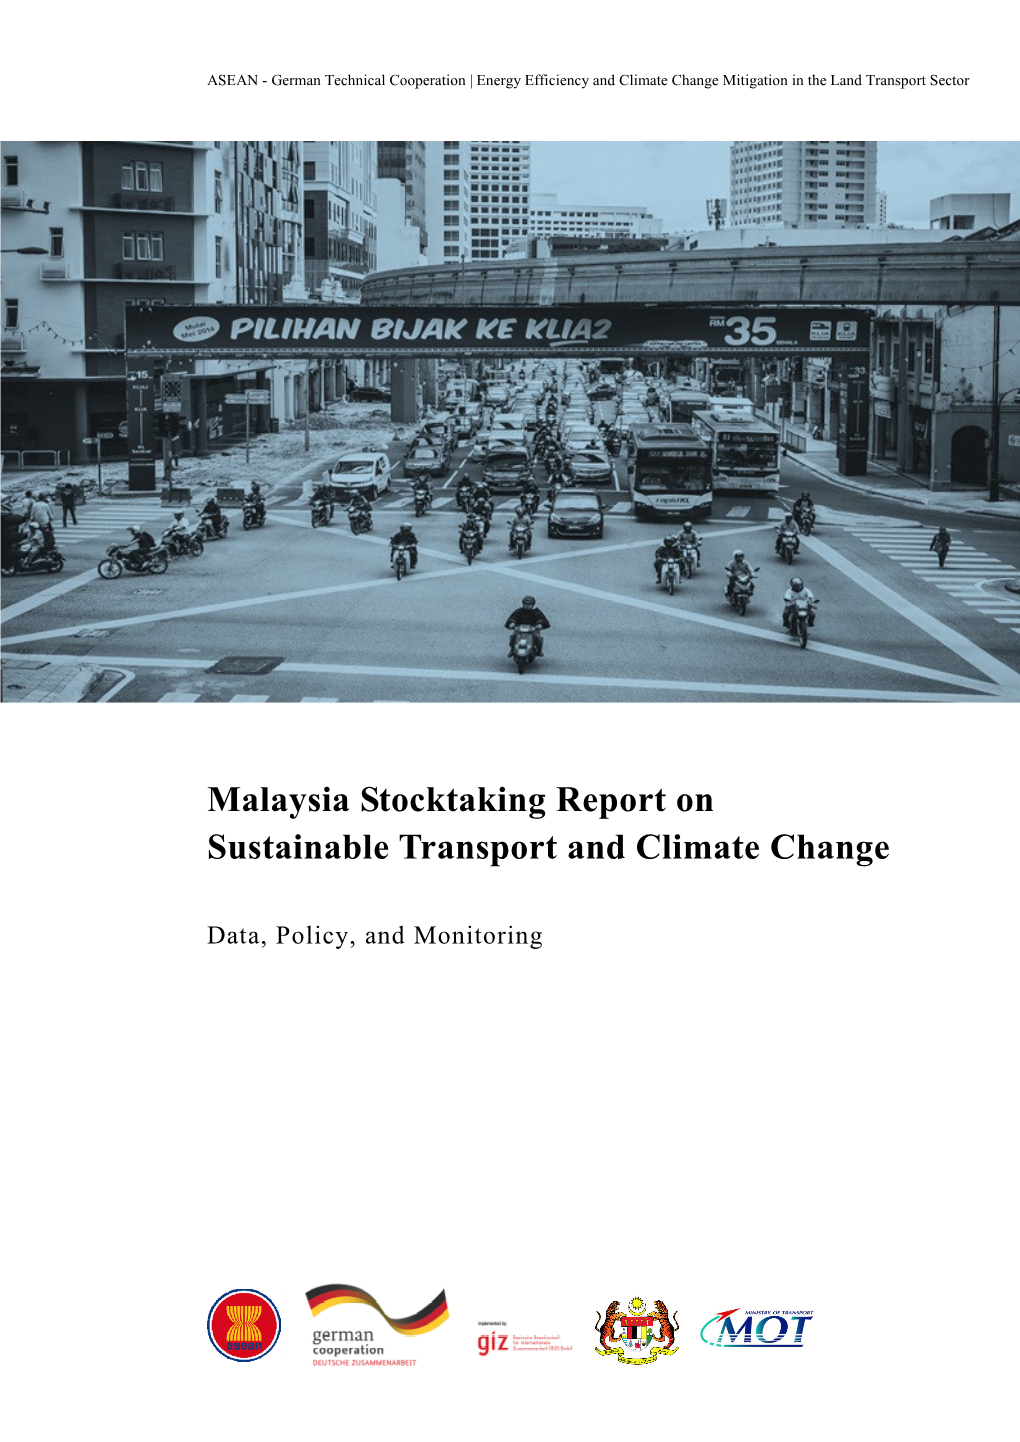 Malaysia Stocktaking Report on Sustainable Transport and Climate Change